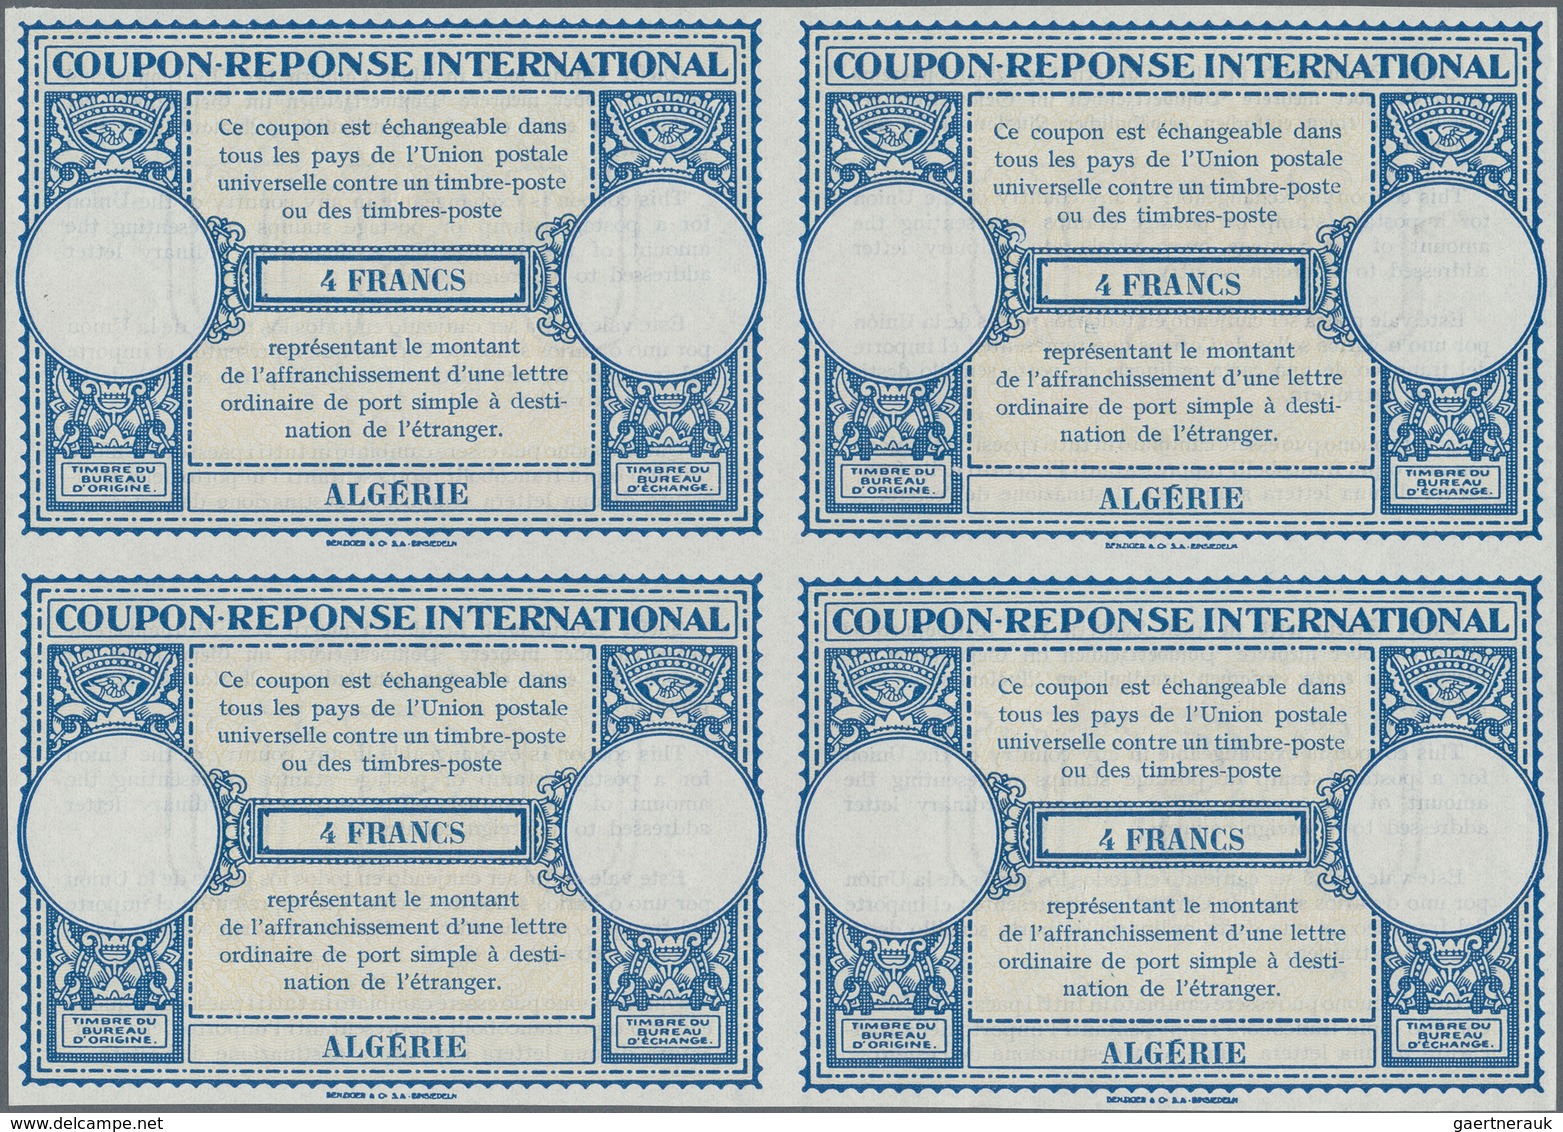 Algerien: 1940s (approx). International Reply Coupon 4 Francs (London Type) In An Unused Block Of 4. - Lettres & Documents